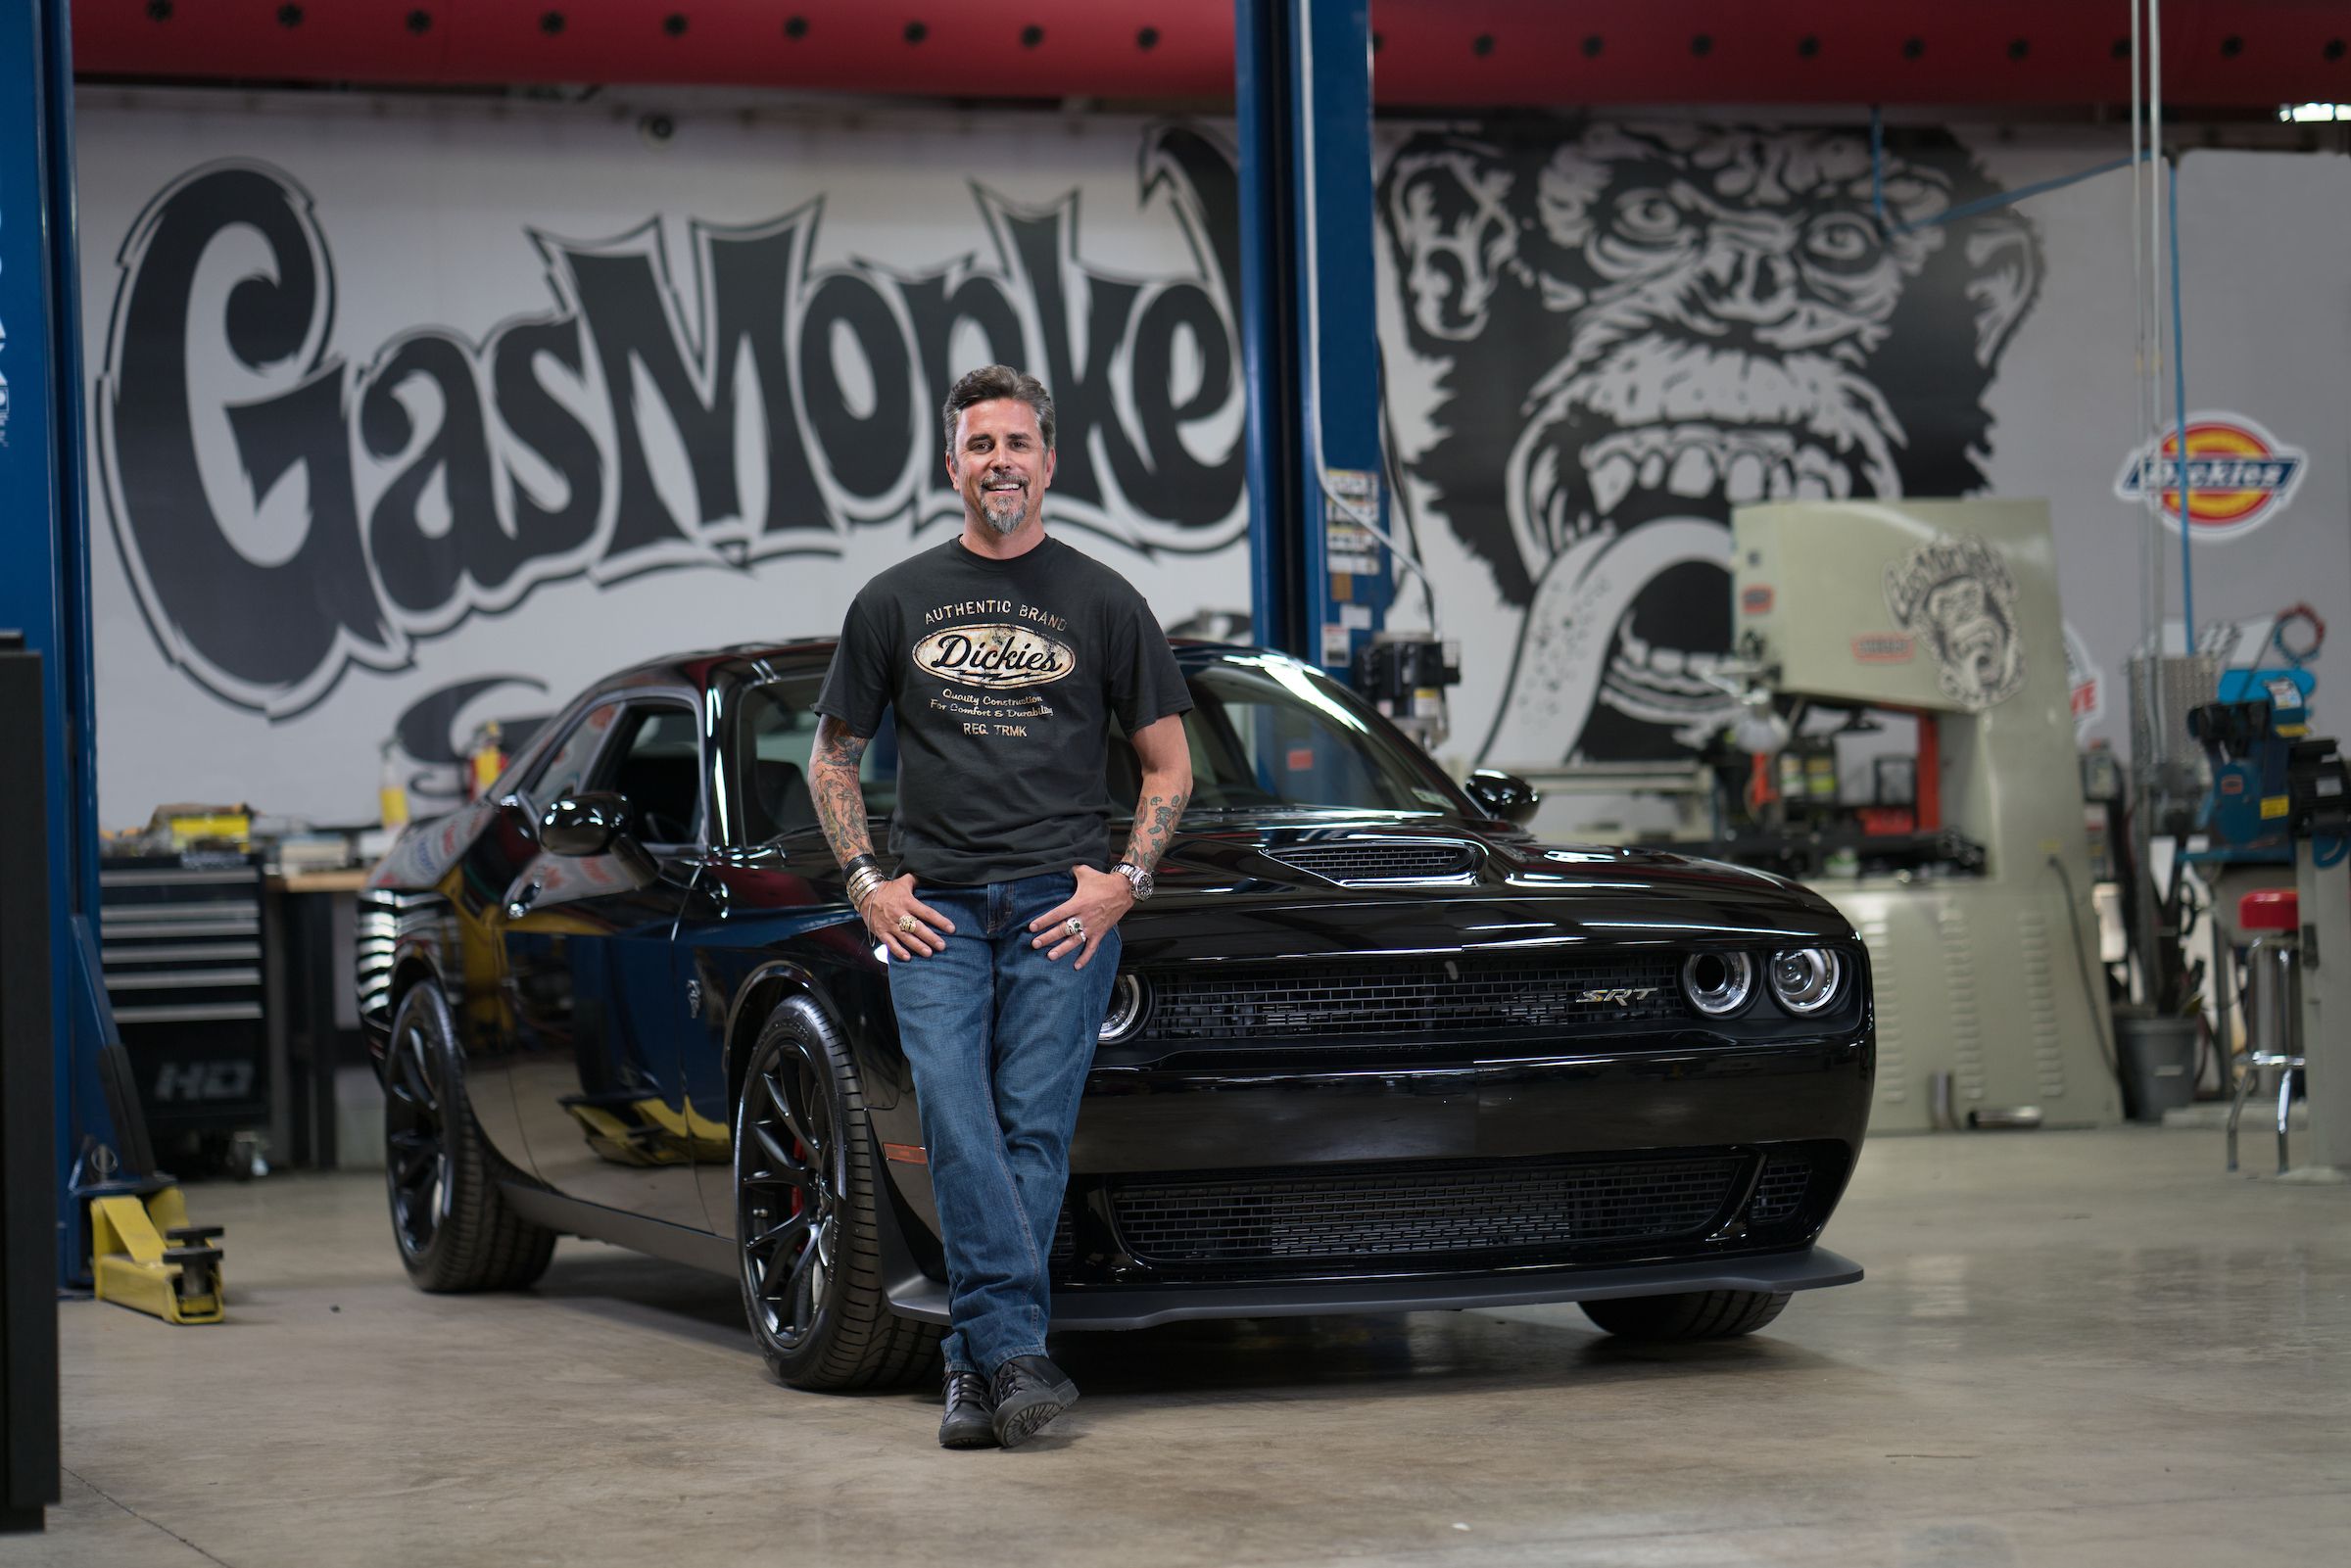 Richard Rawlings Put Up Gas Monkey Garage And Proceeded To Put It On A TV Show